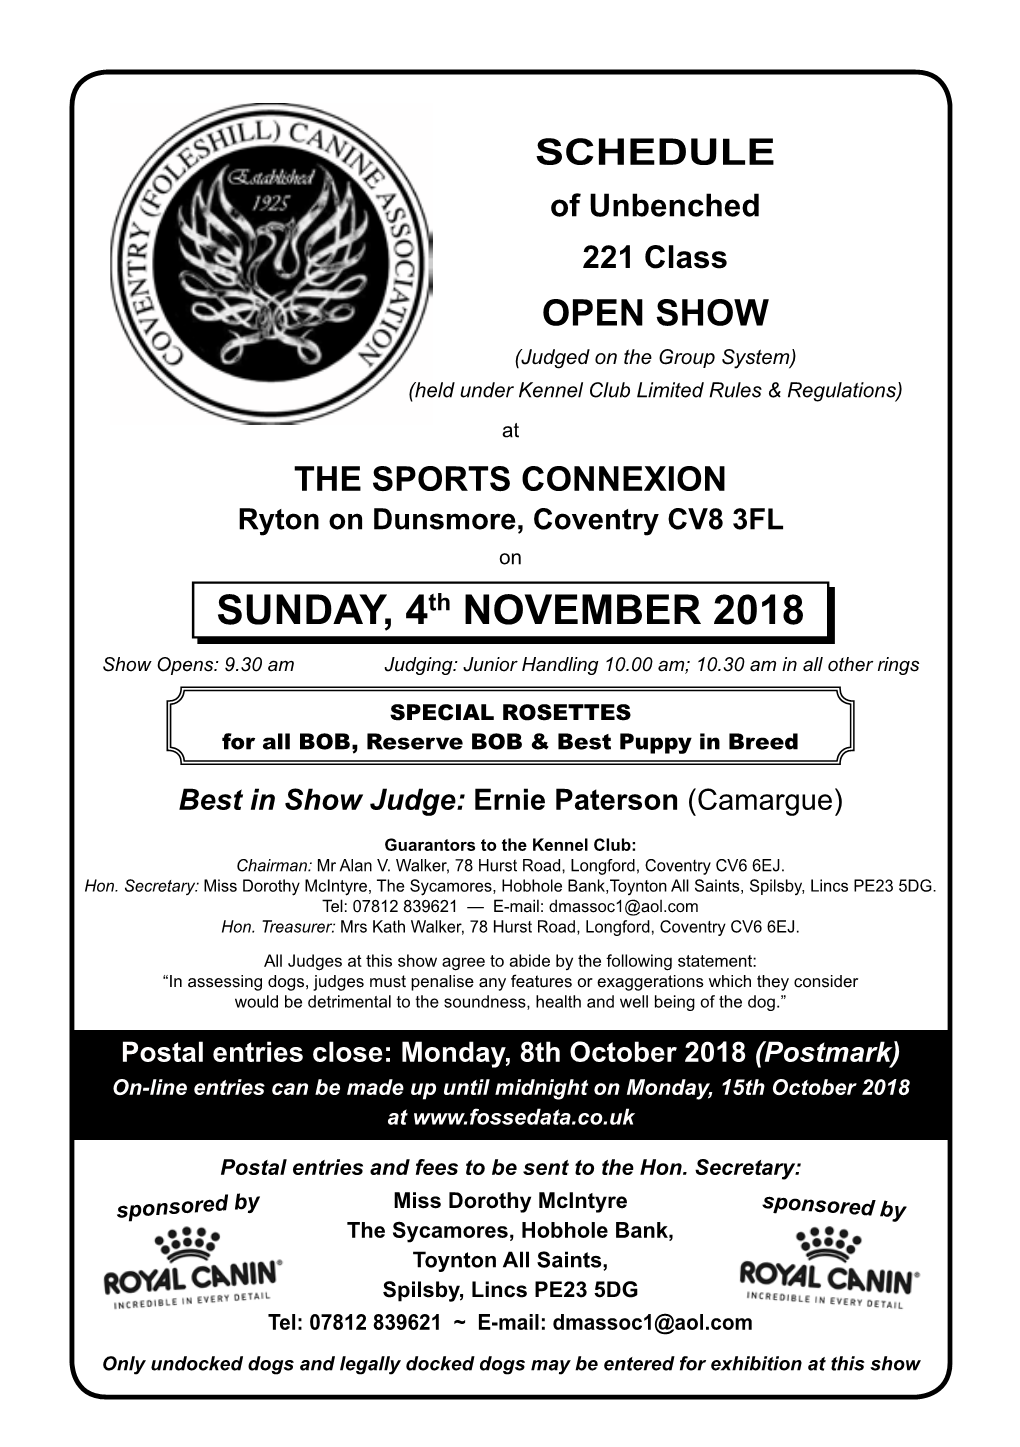 SUNDAY, 4Th NOVEMBER 2018 Show Opens: 9.30 Am Judging: Junior Handling 10.00 Am; 10.30 Am in All Other Rings